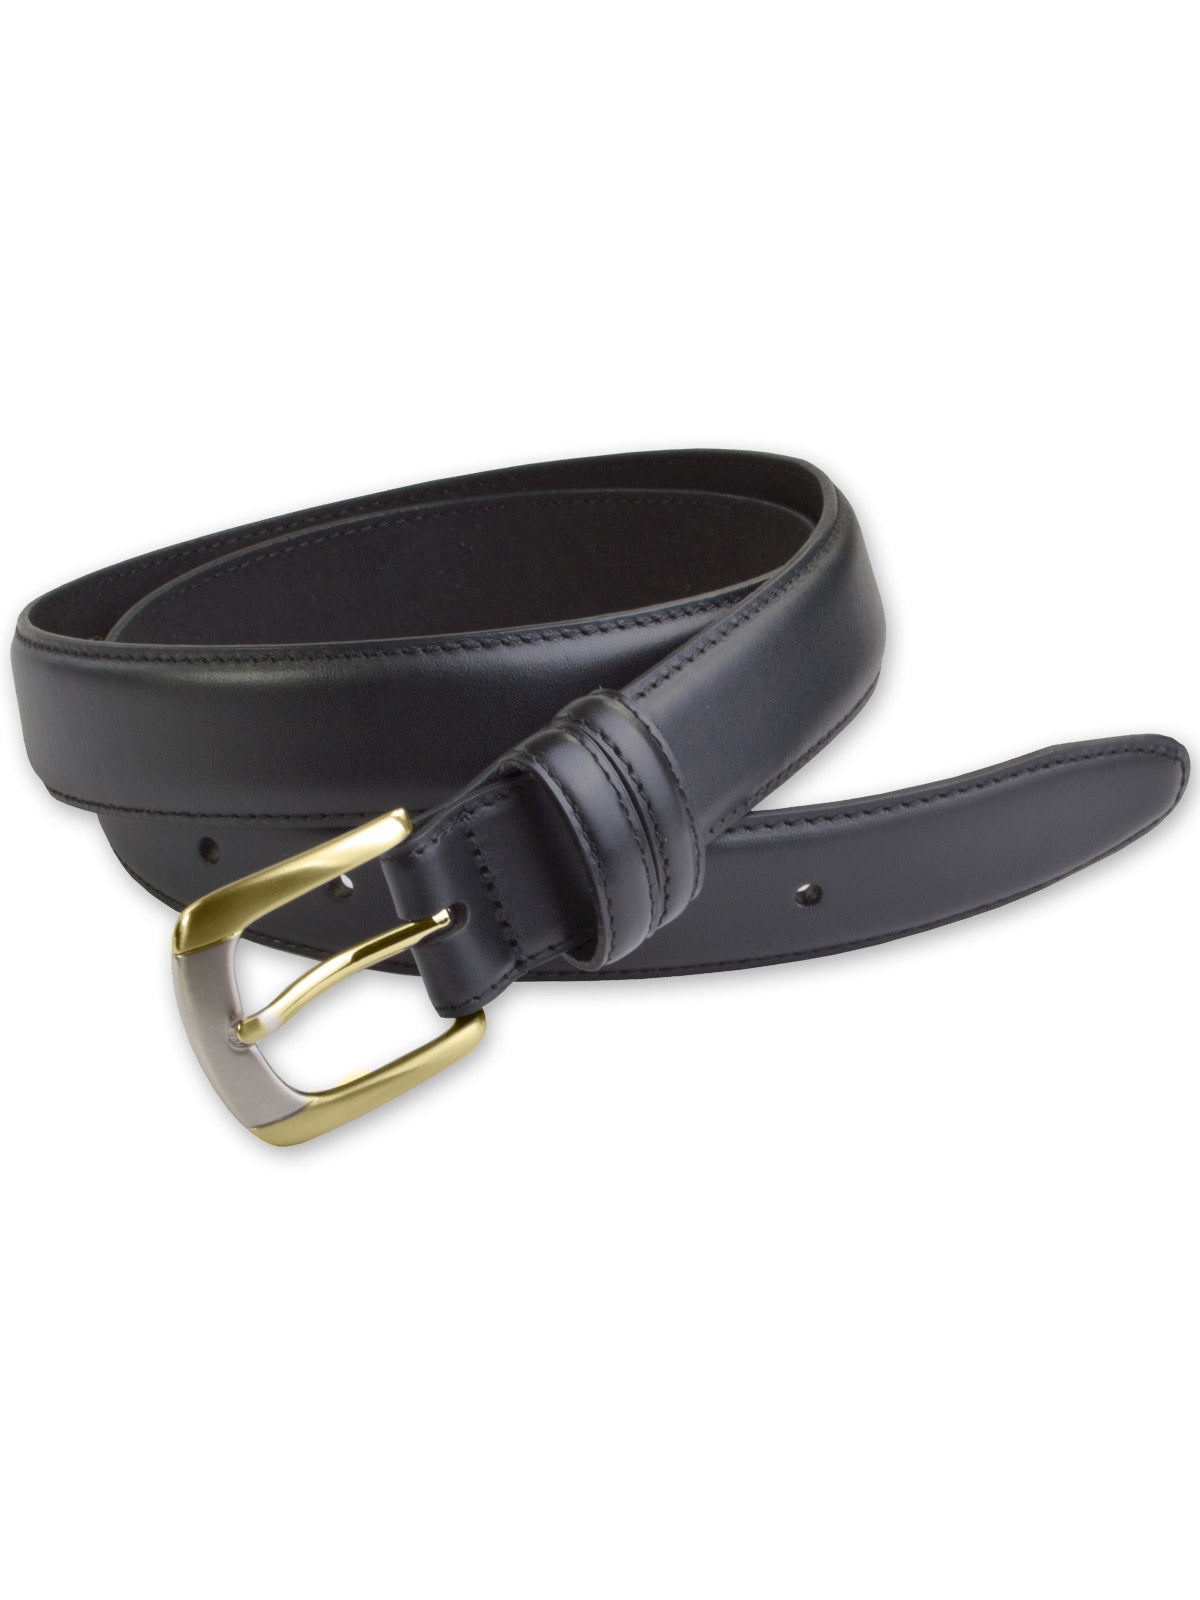 Marc Wolf Leather Dress Belts - Two Tone Buckle (34 - 42)